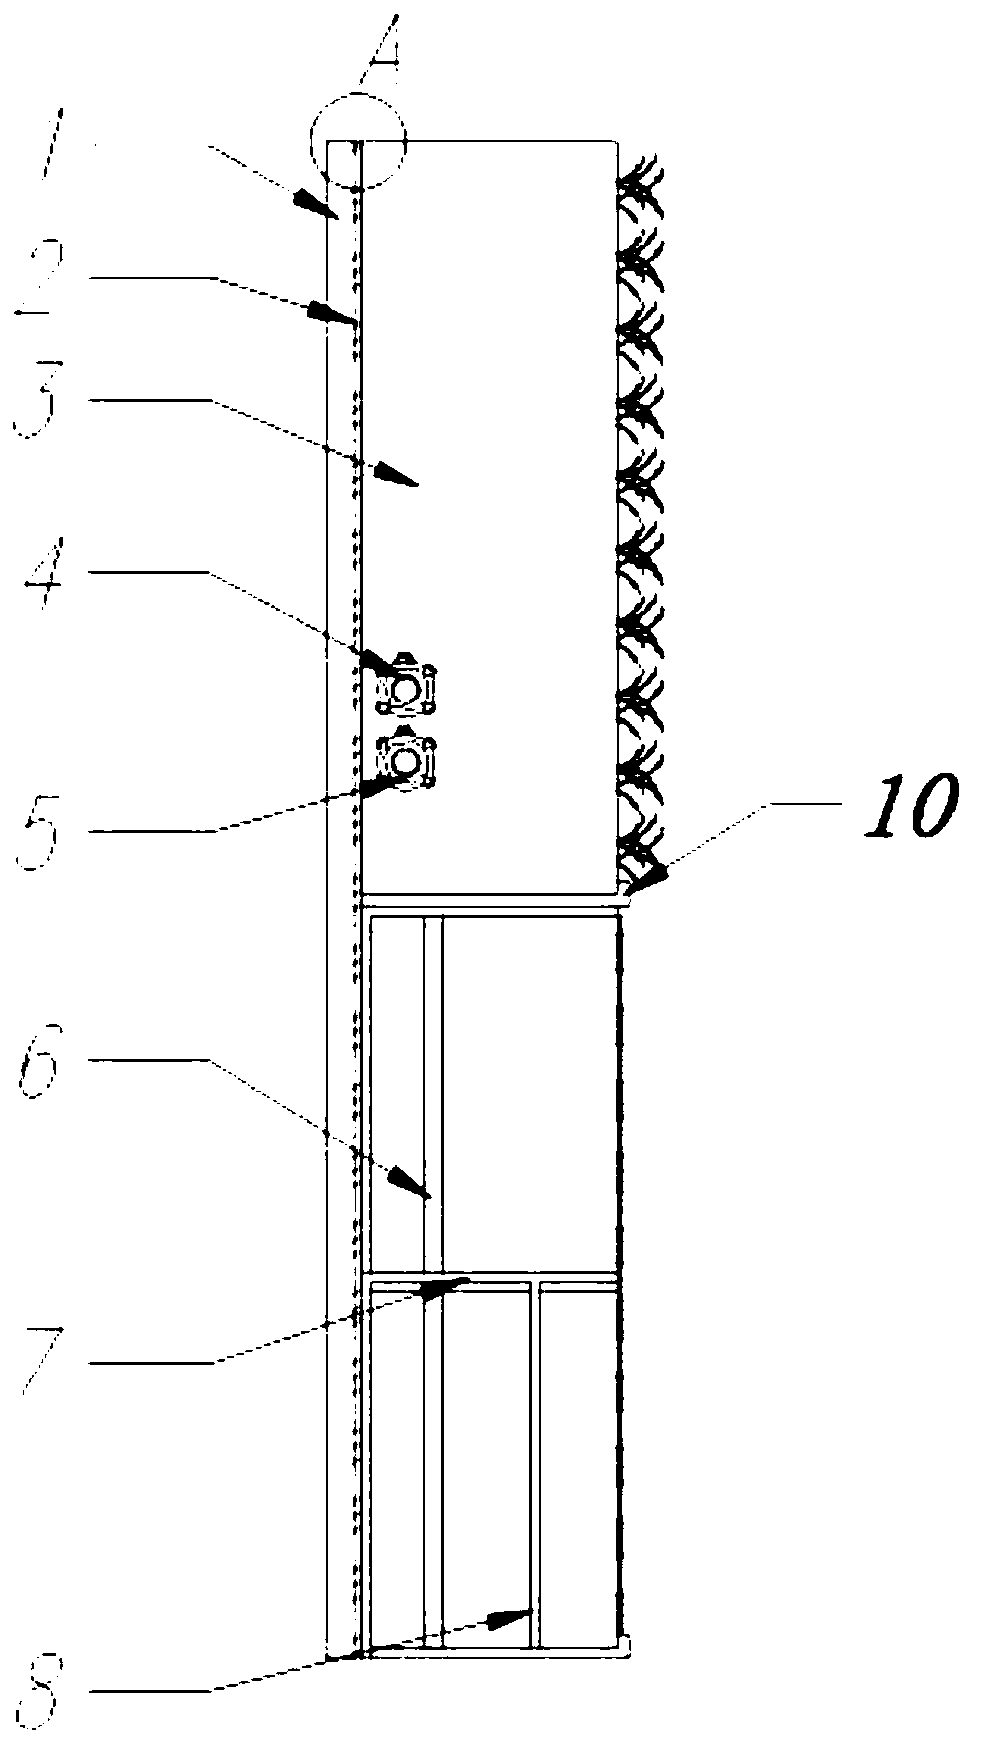 Automatic irrigating and vertical greening device based on porous suction filtration material